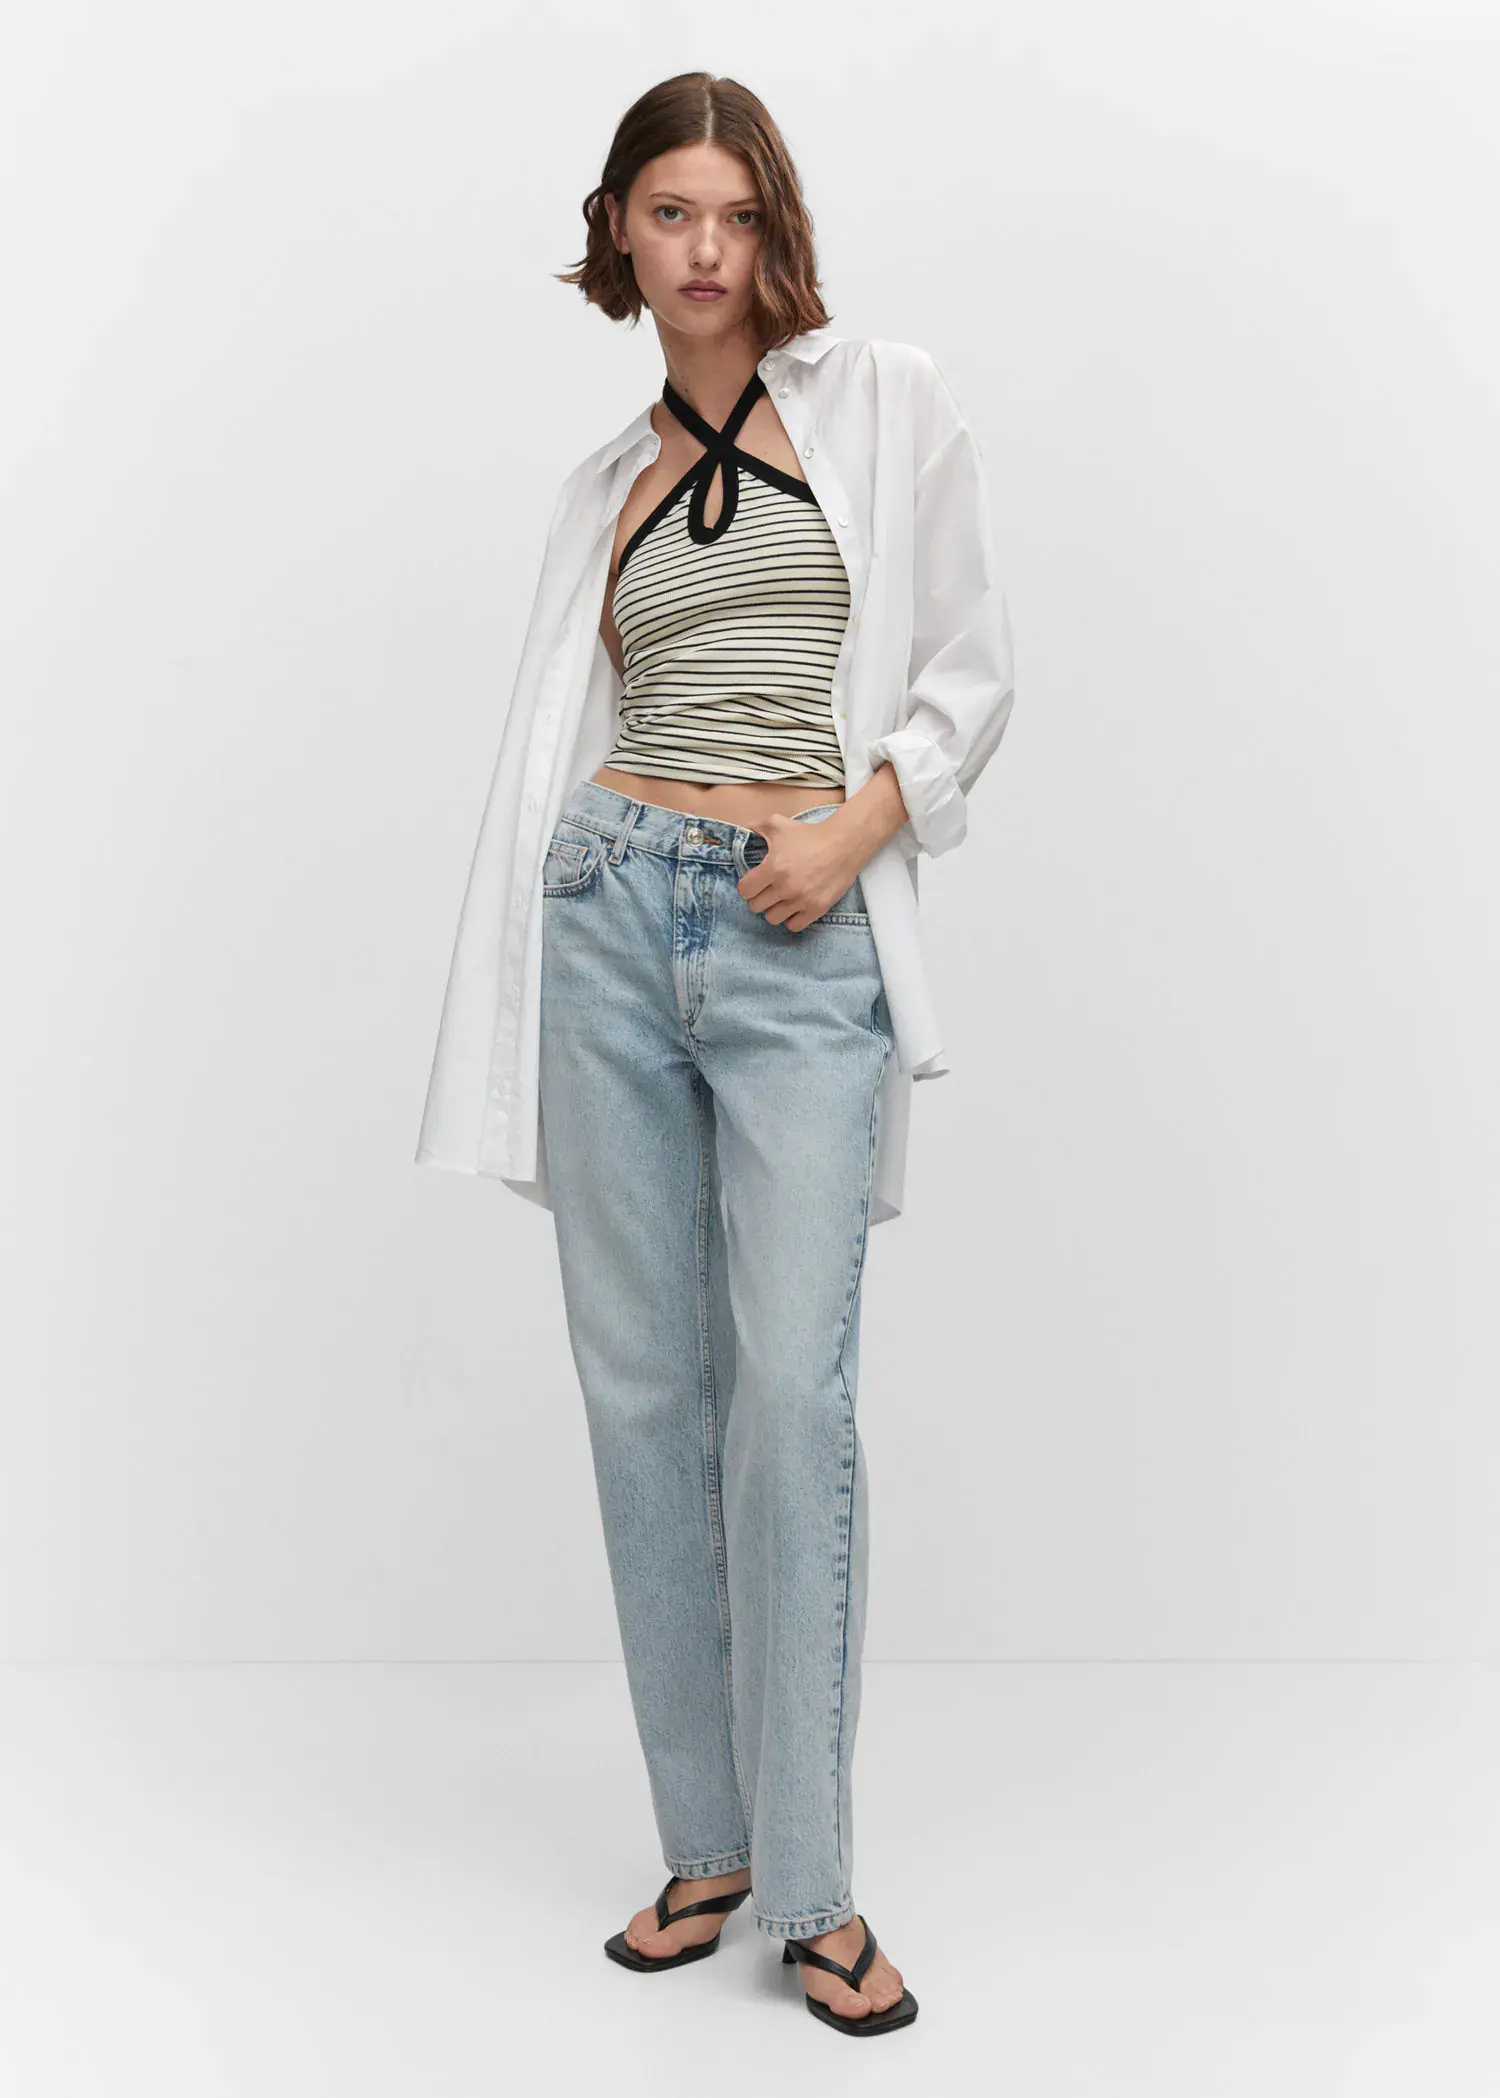 Mango Mid-rise straight jeans. a woman wearing a striped top and jeans. 